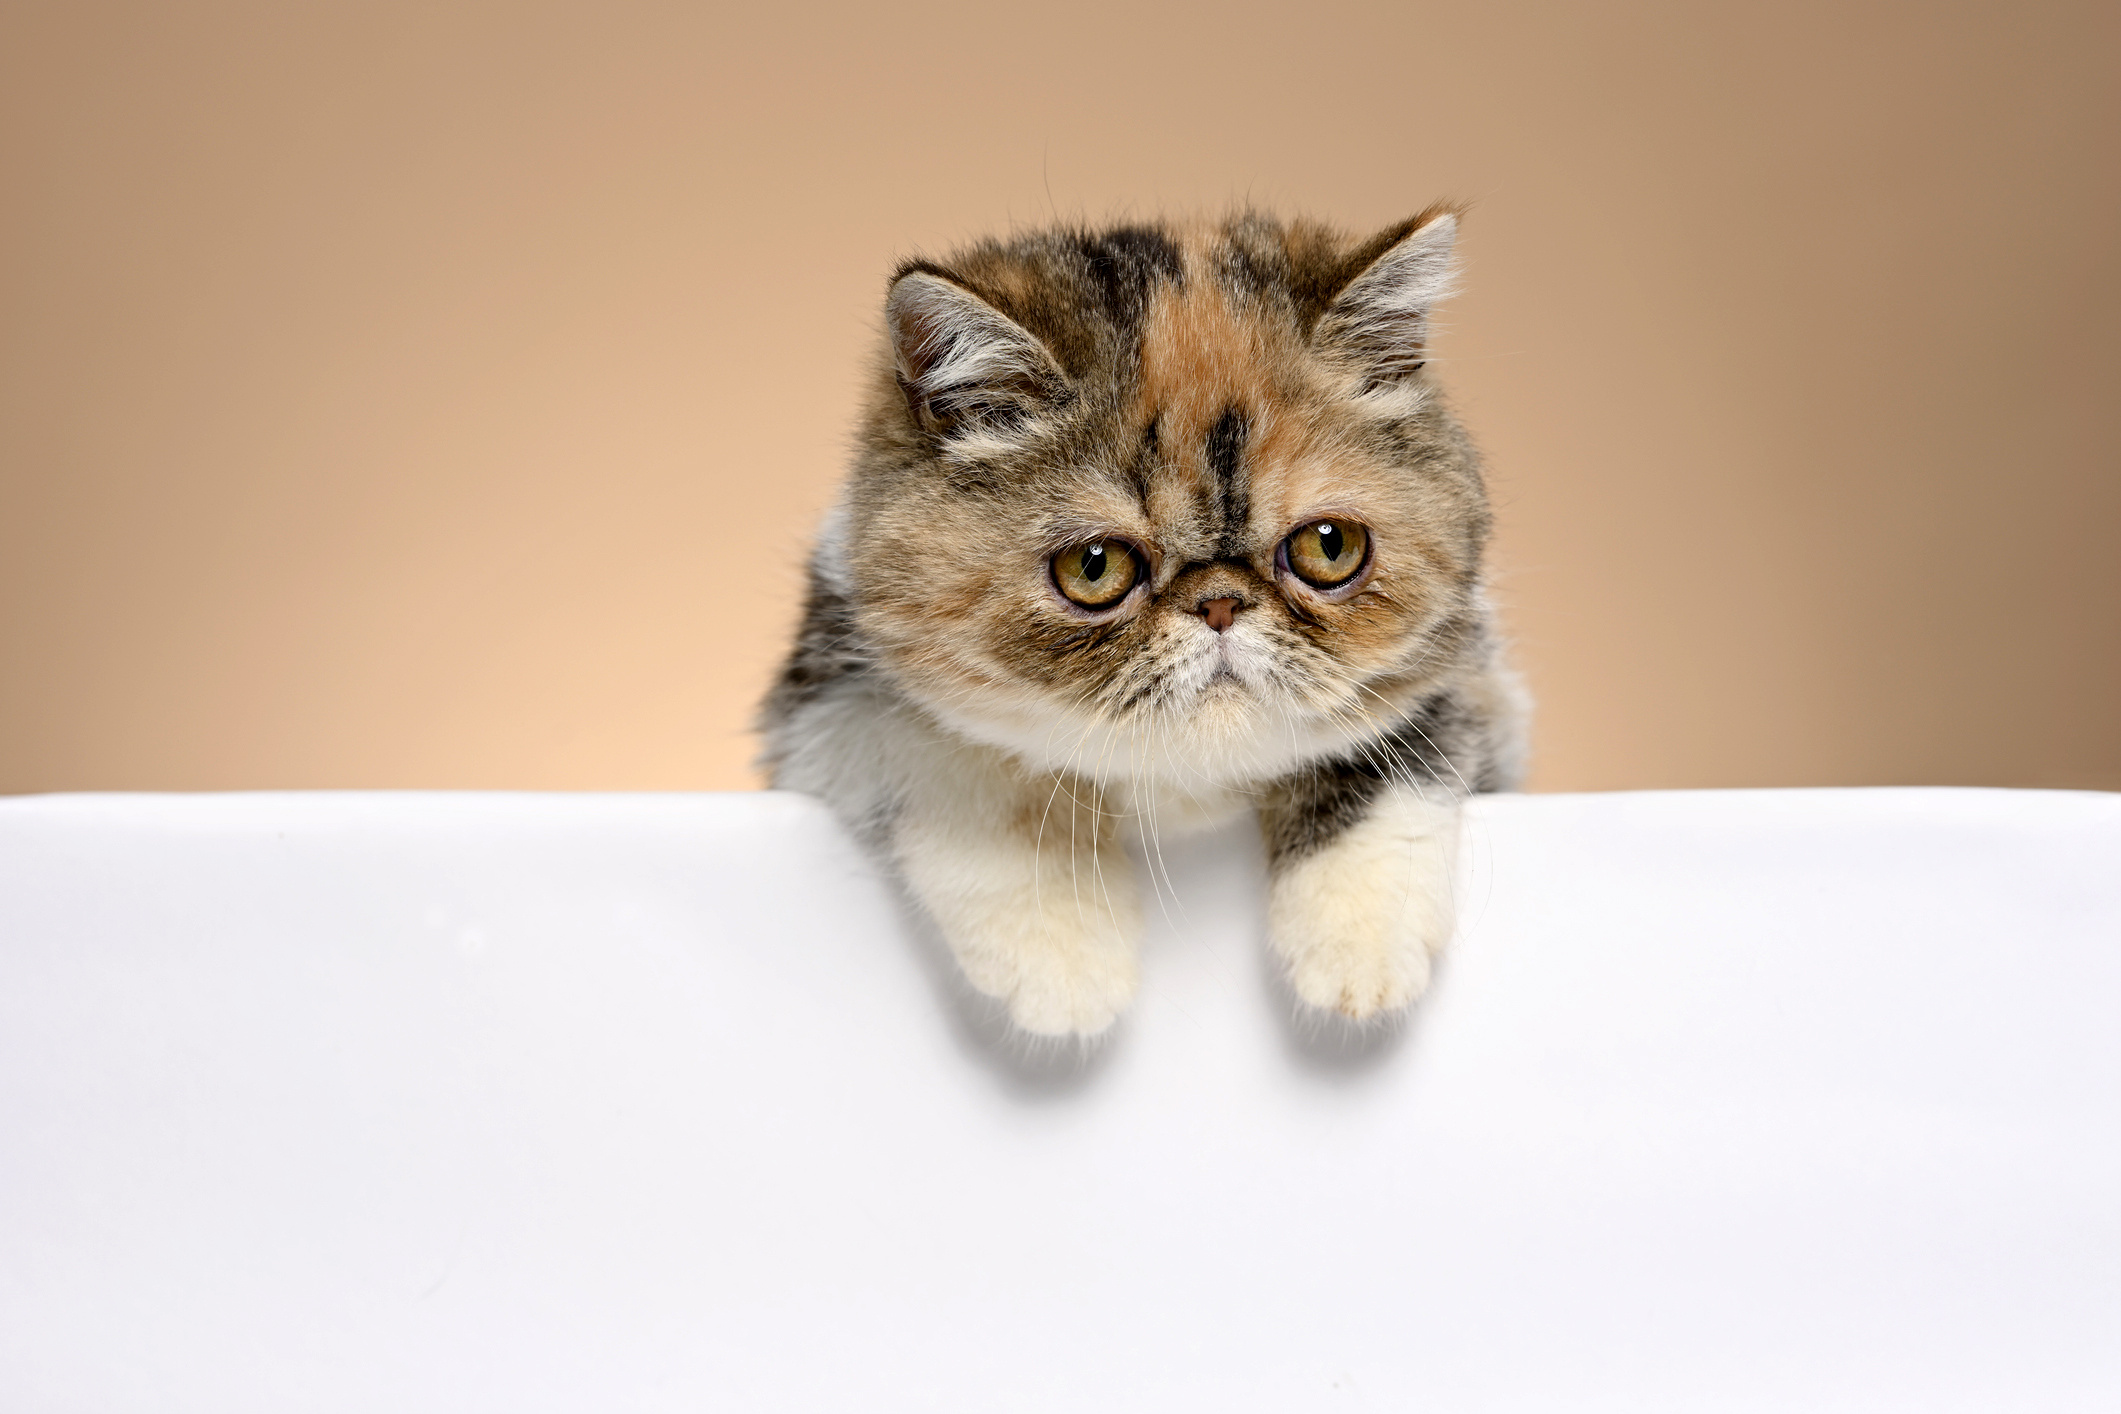 Exotic Shorthair Cat: Nicknamed “the lazy man’s Persian” because he shares the Persian’s sweet face, but his short, plush coat is easier to care for. 2130x1420 HD Wallpaper.